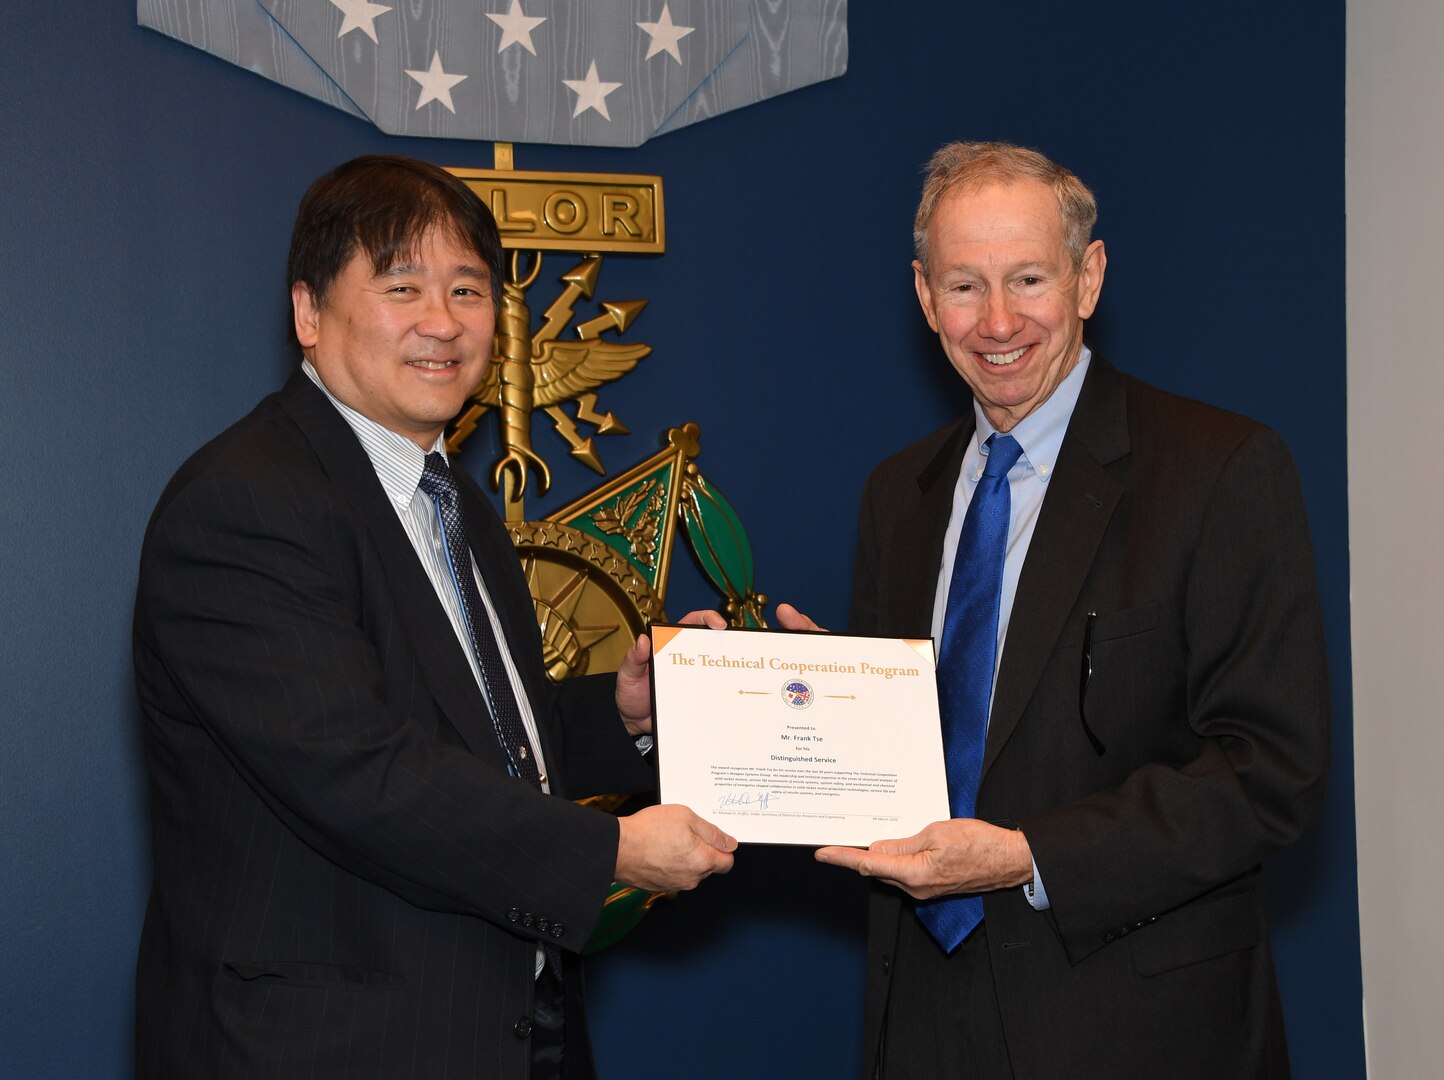 Frank Tse receives a Distinguished Service Award for his work with TTCP Weapons Technical Panel 4 from Dr. Michael Griffin, Undersecretary of Defense for Research and Engineering during the 2019 Science and Technology International Award Ceremony at the Pentagon, March 4. (U.S. Army photo by Darrell Hudson/RELEASED)